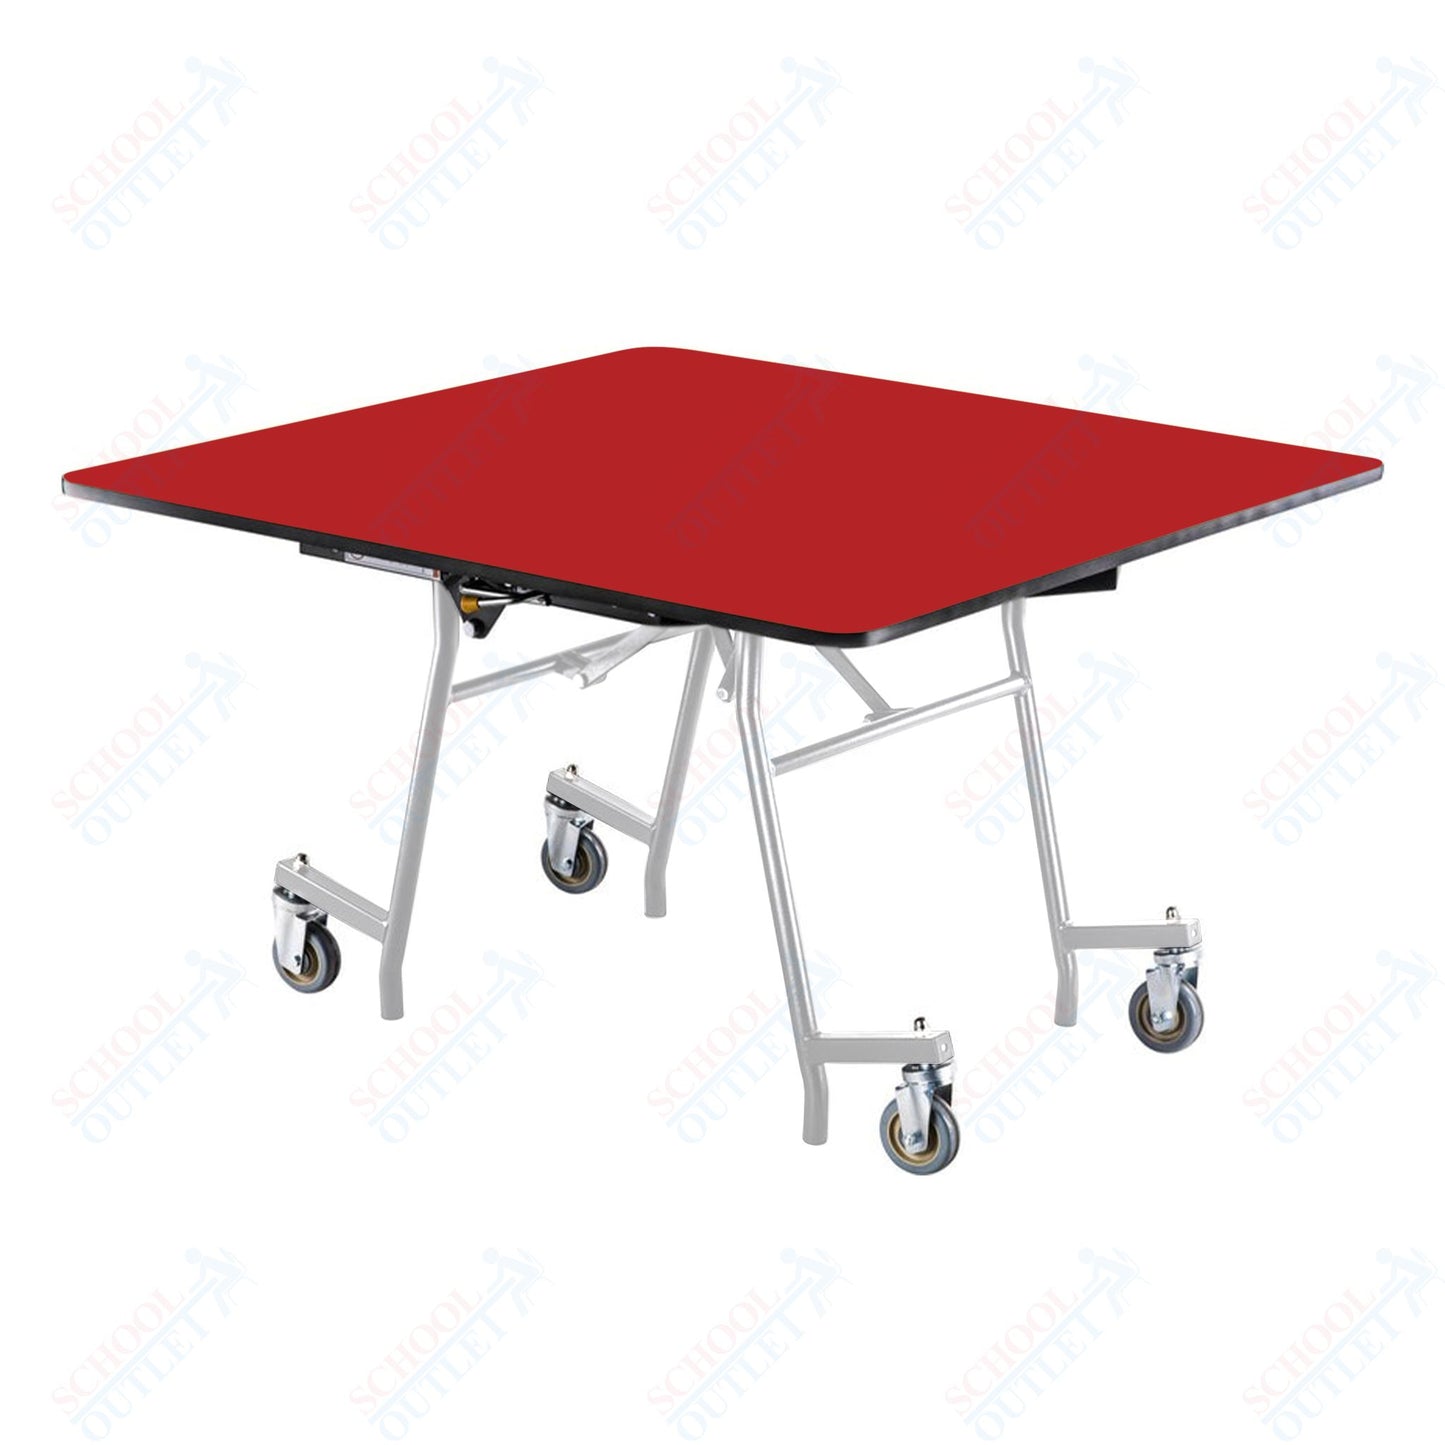 NPS MTSSF Series 48" Square Easyfold Mobile Table (National Public Seating NPS-MTSSF-48Q)